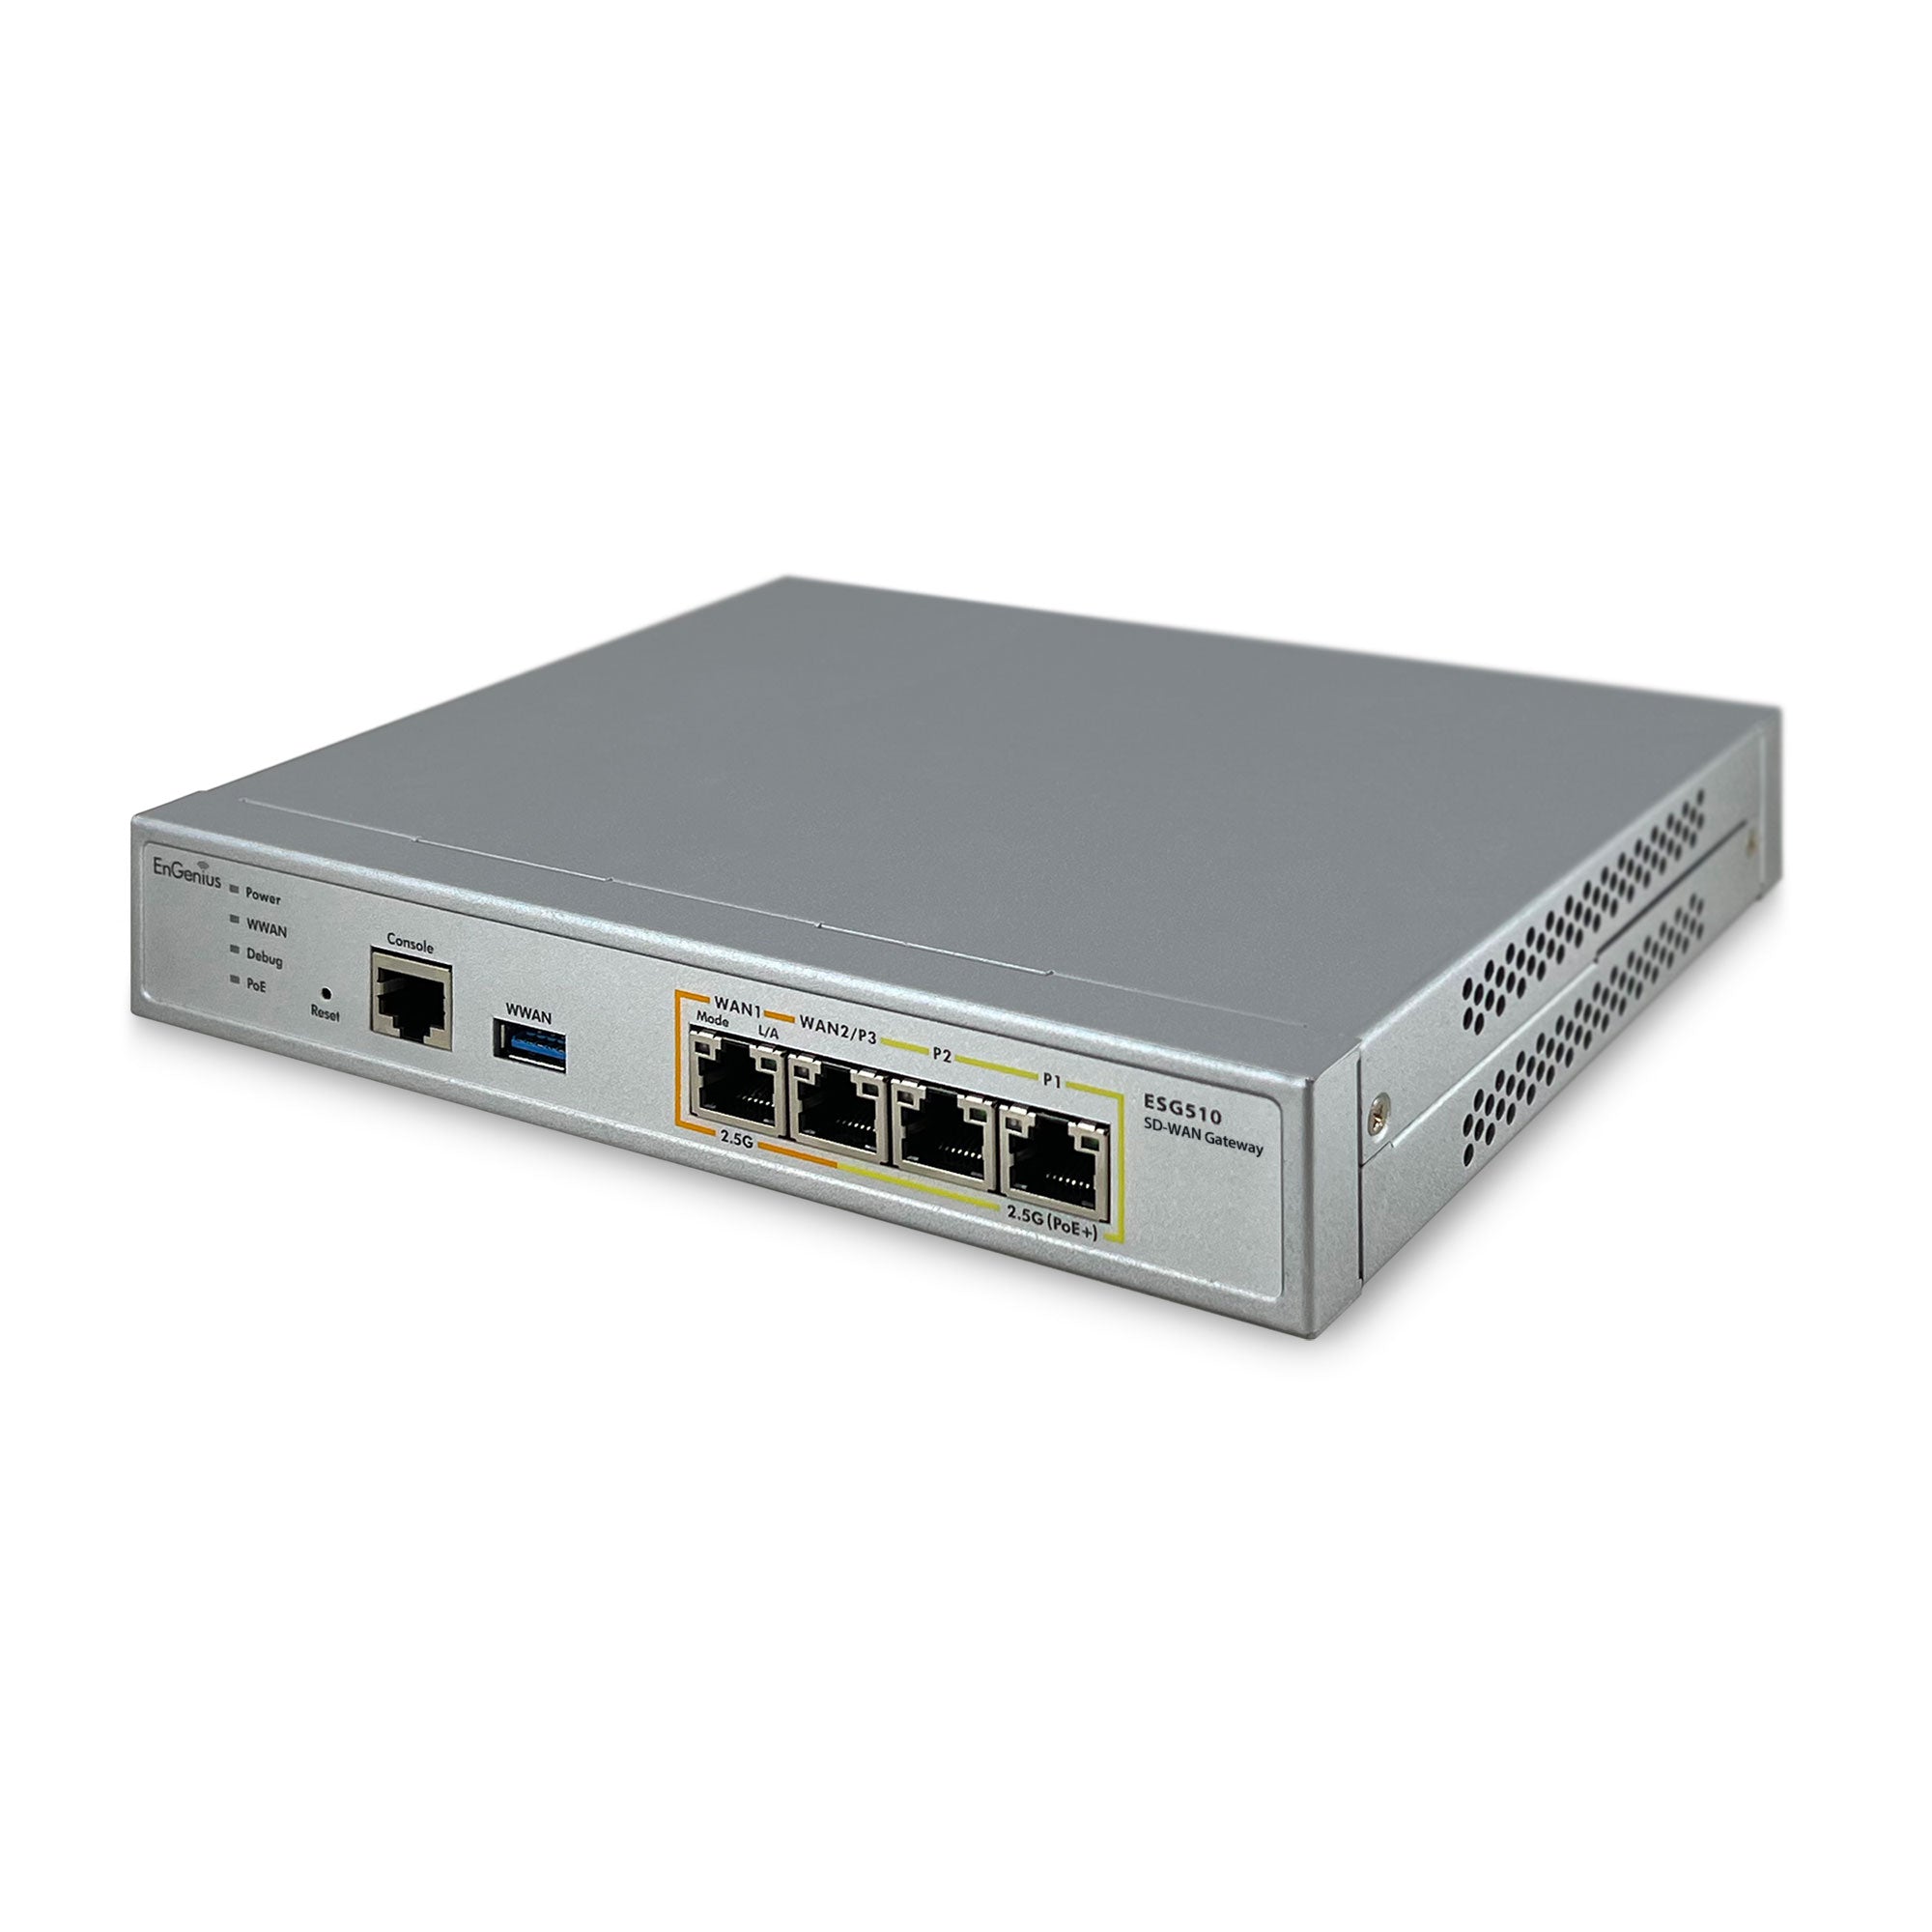 ESG510: Cloud Managed SD-WAN Security Gateway with Quad Core 1.6GHz and 4x 2.5G ports